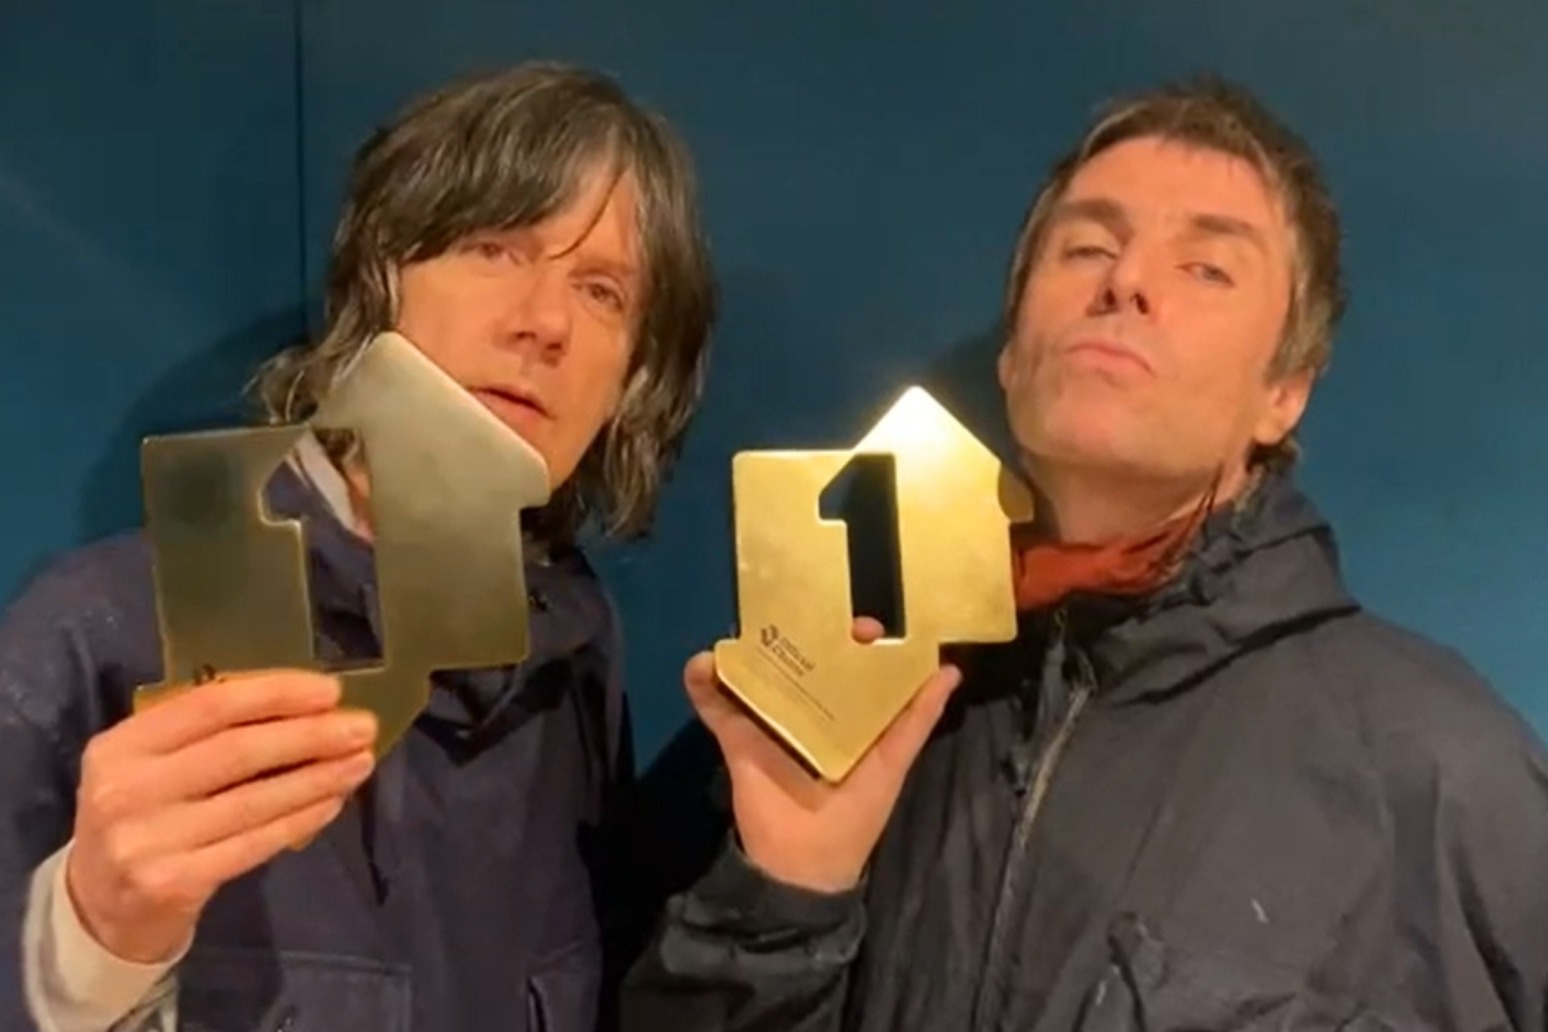 Liam Gallagher and John Squire hit number one 